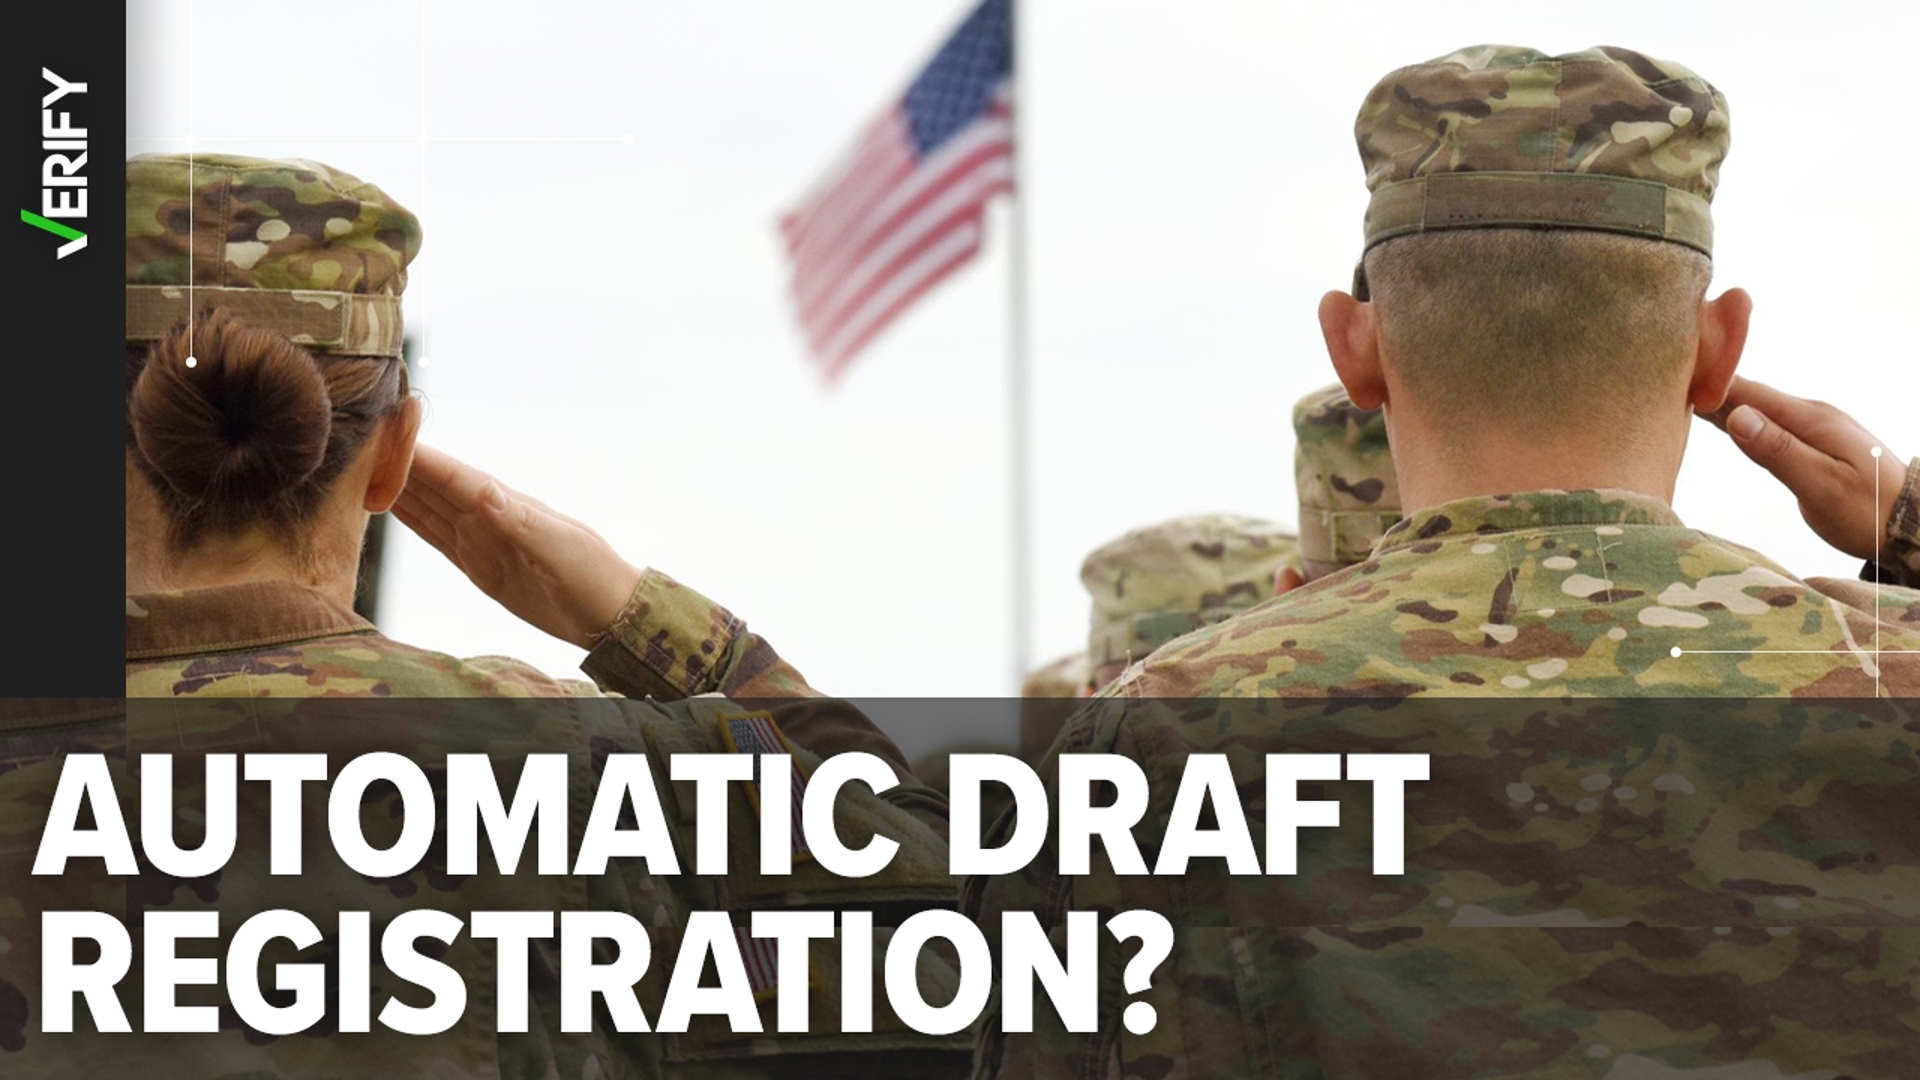 Posts claim an annual defense bill would automatically register young men and women for the military draft. Here’s what we can VERIFY about the proposed legislation.